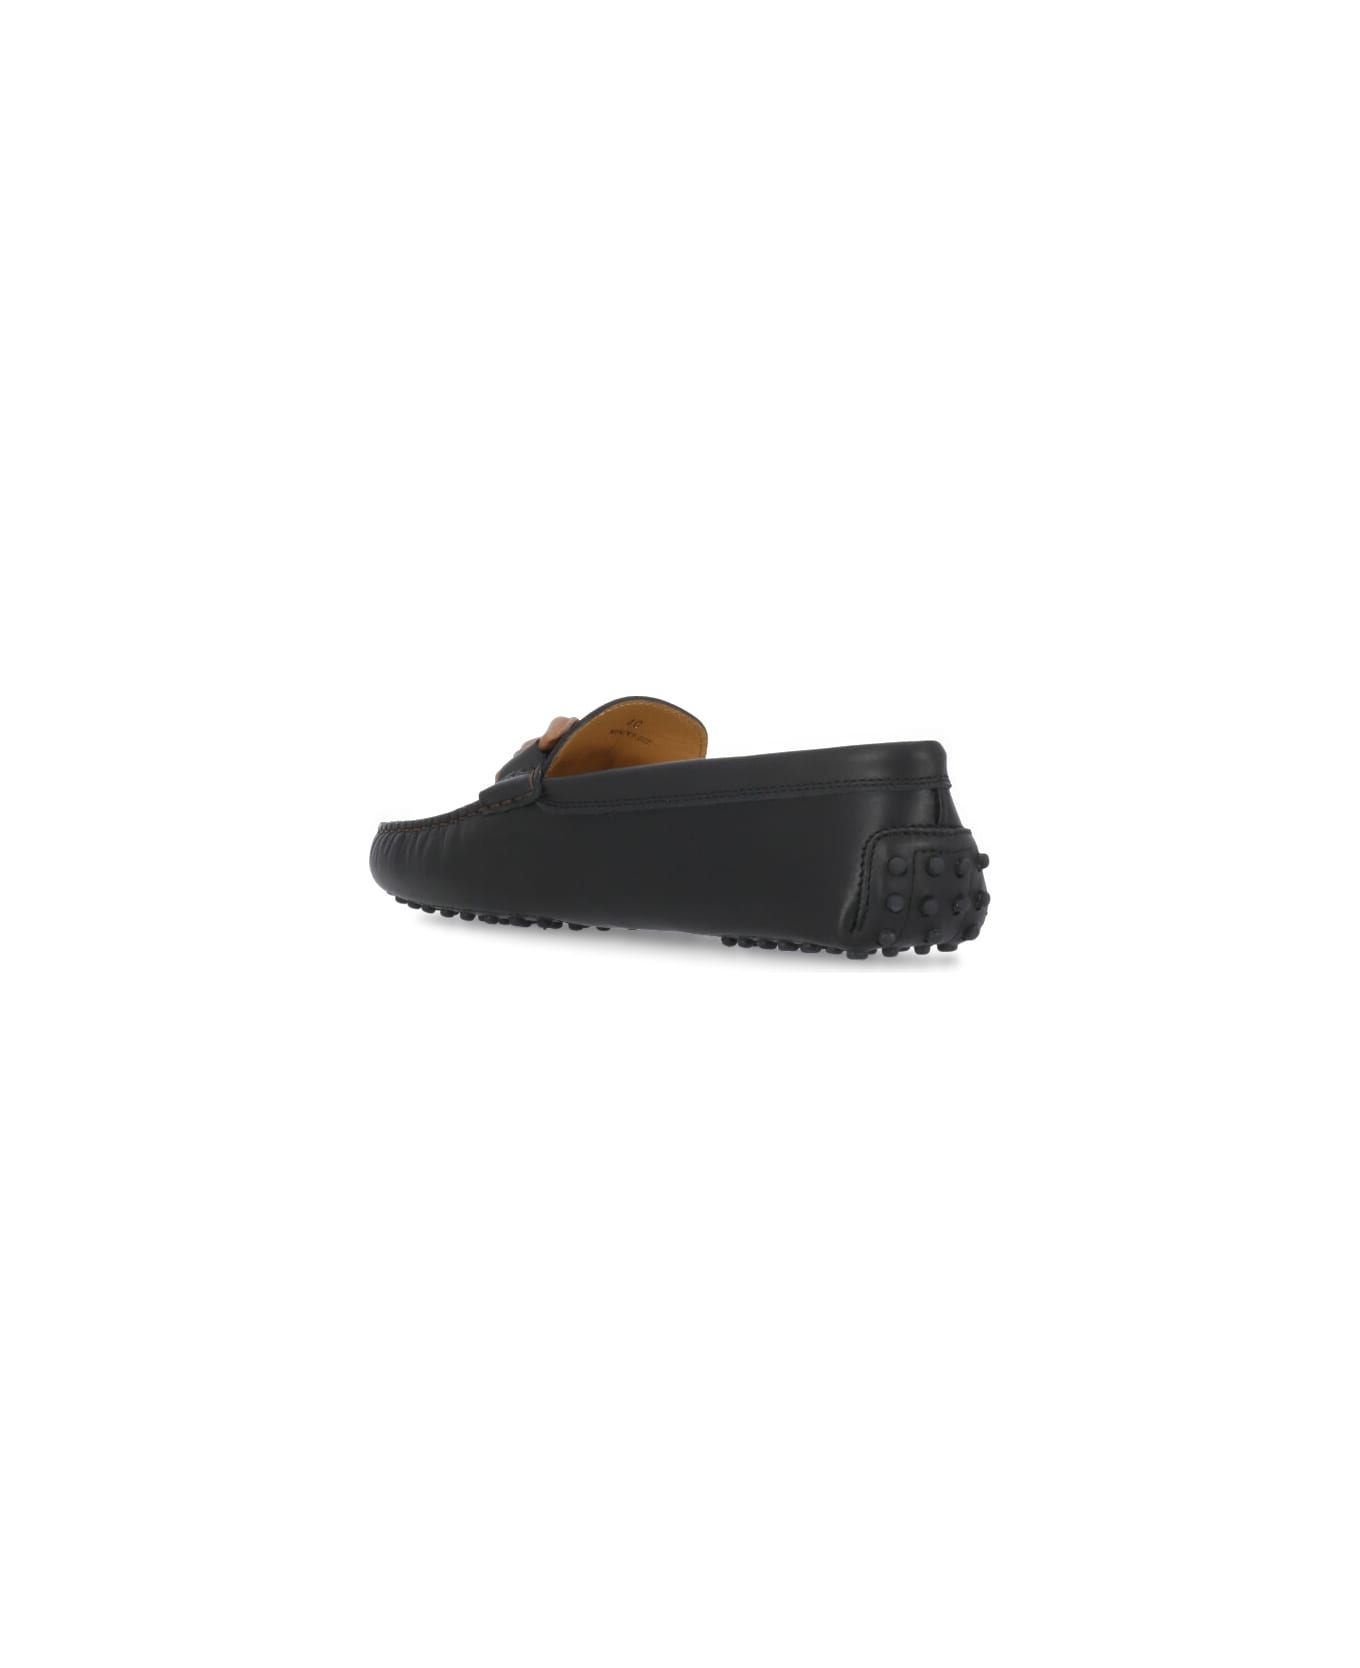 Tod's Gommino Kate Leather Moccasin - Black フラットシューズ